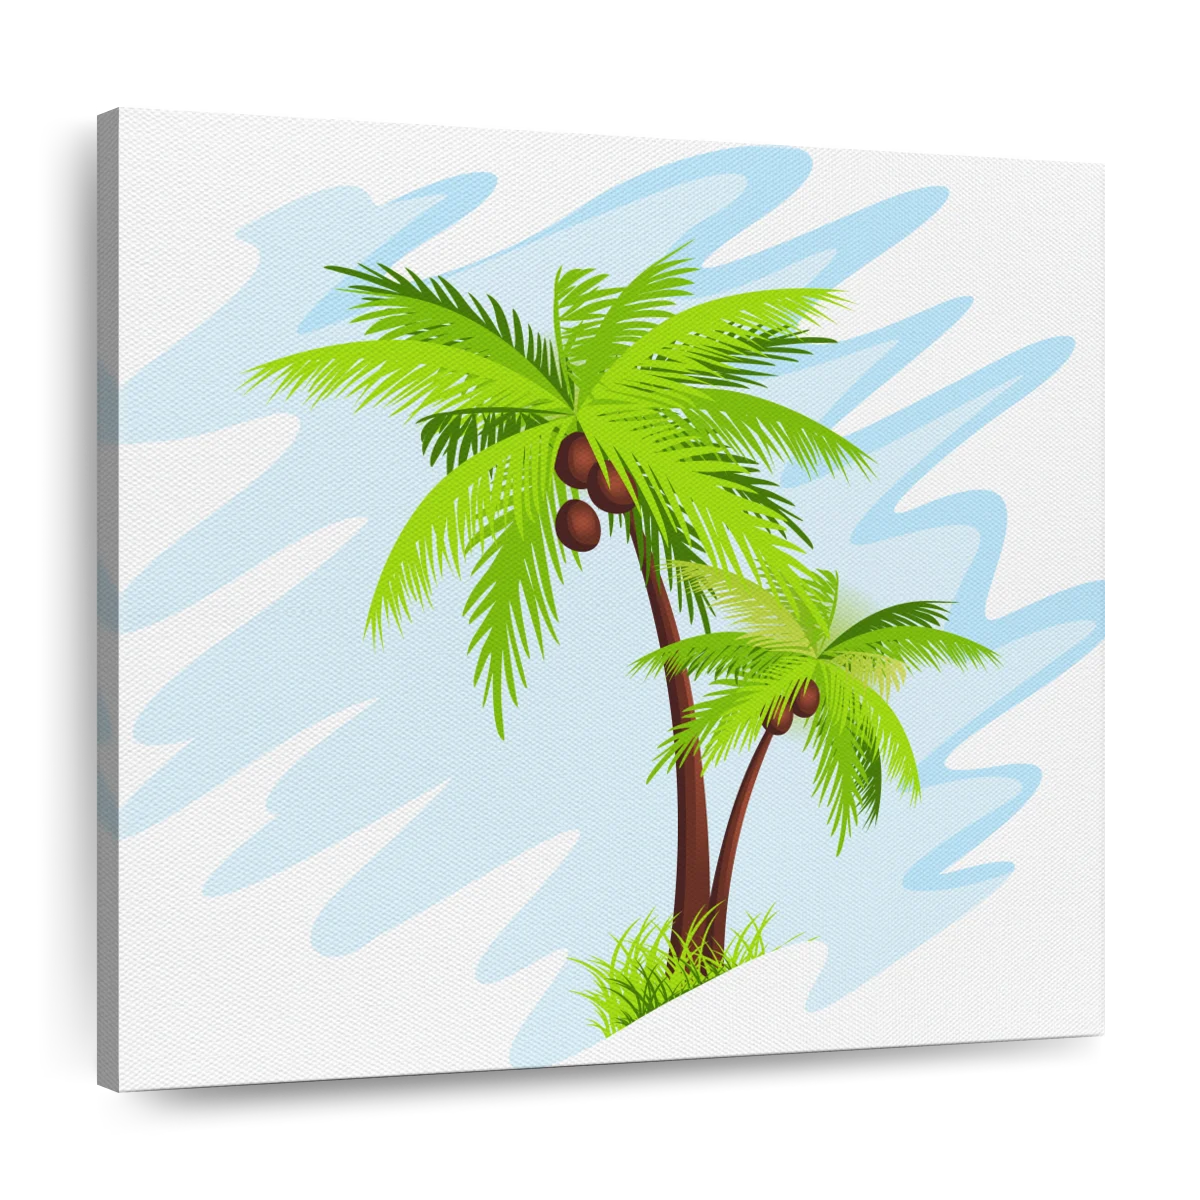 Coconut Tree || | Easy Coconut Tree Drawing || Easy for beginners ||  #painting #easy #coconut Art Ideas | By Art IdeasFacebook